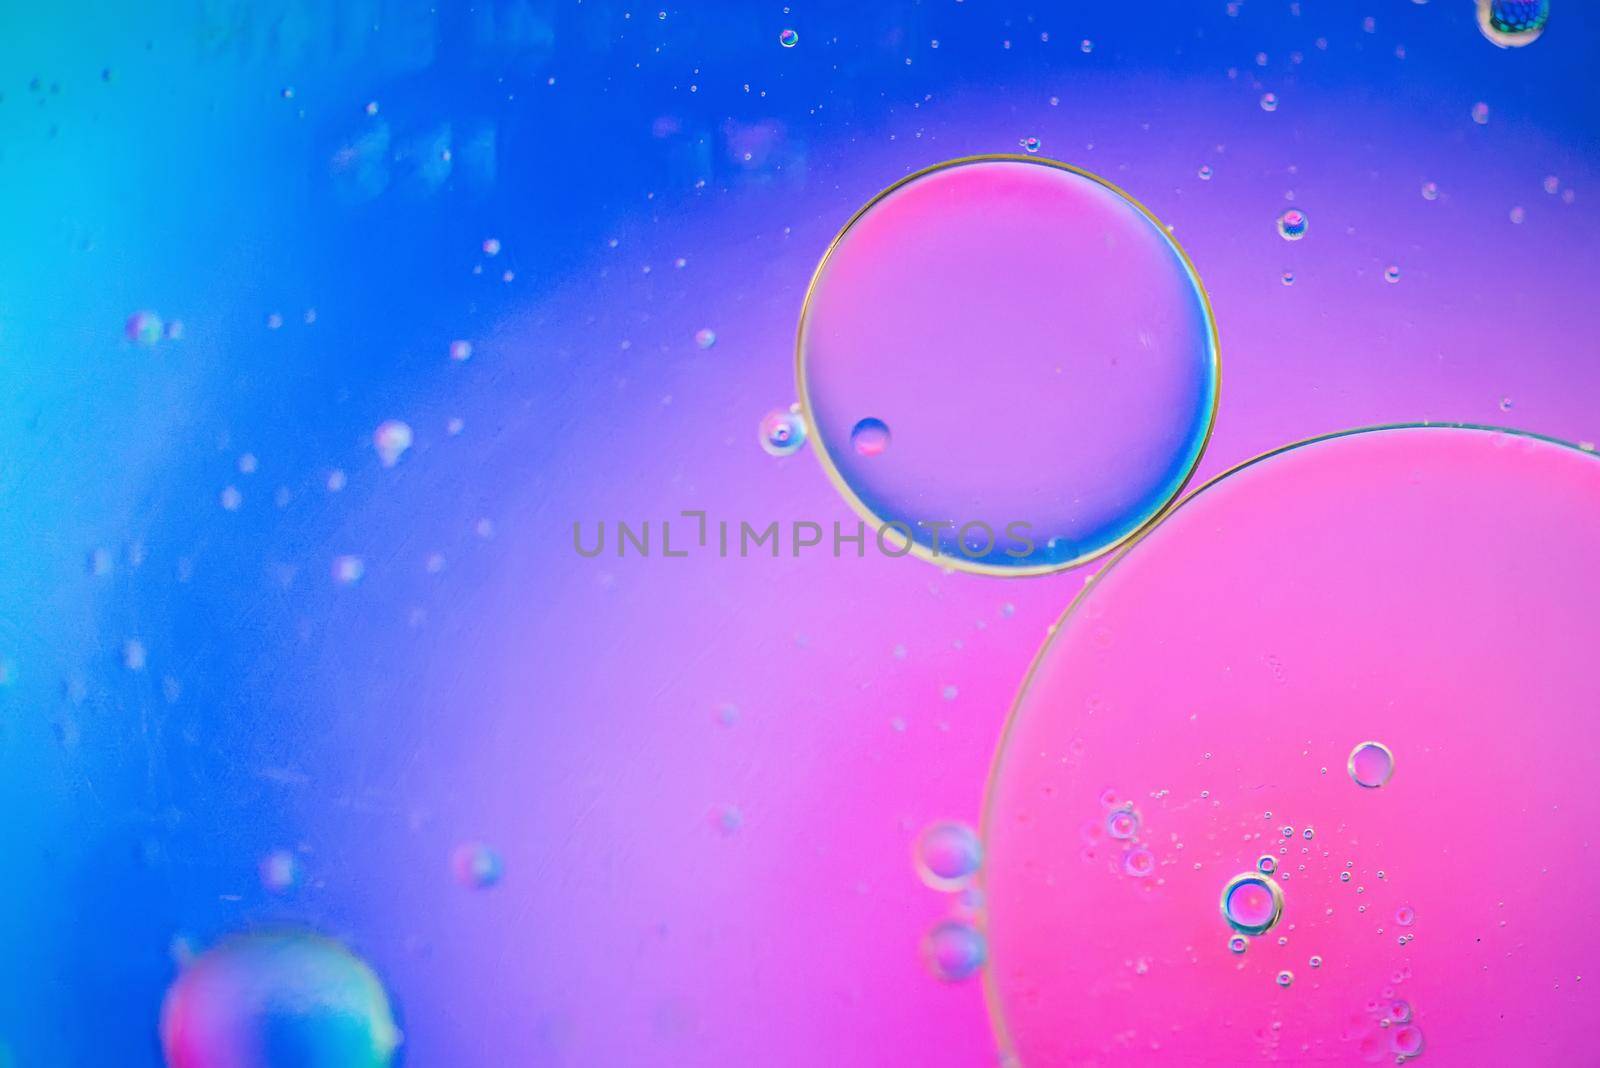 Oil drops in water. Abstract psychedelic defocused pattern image multicolored. Abstract background with colorful gradient colors. DOF